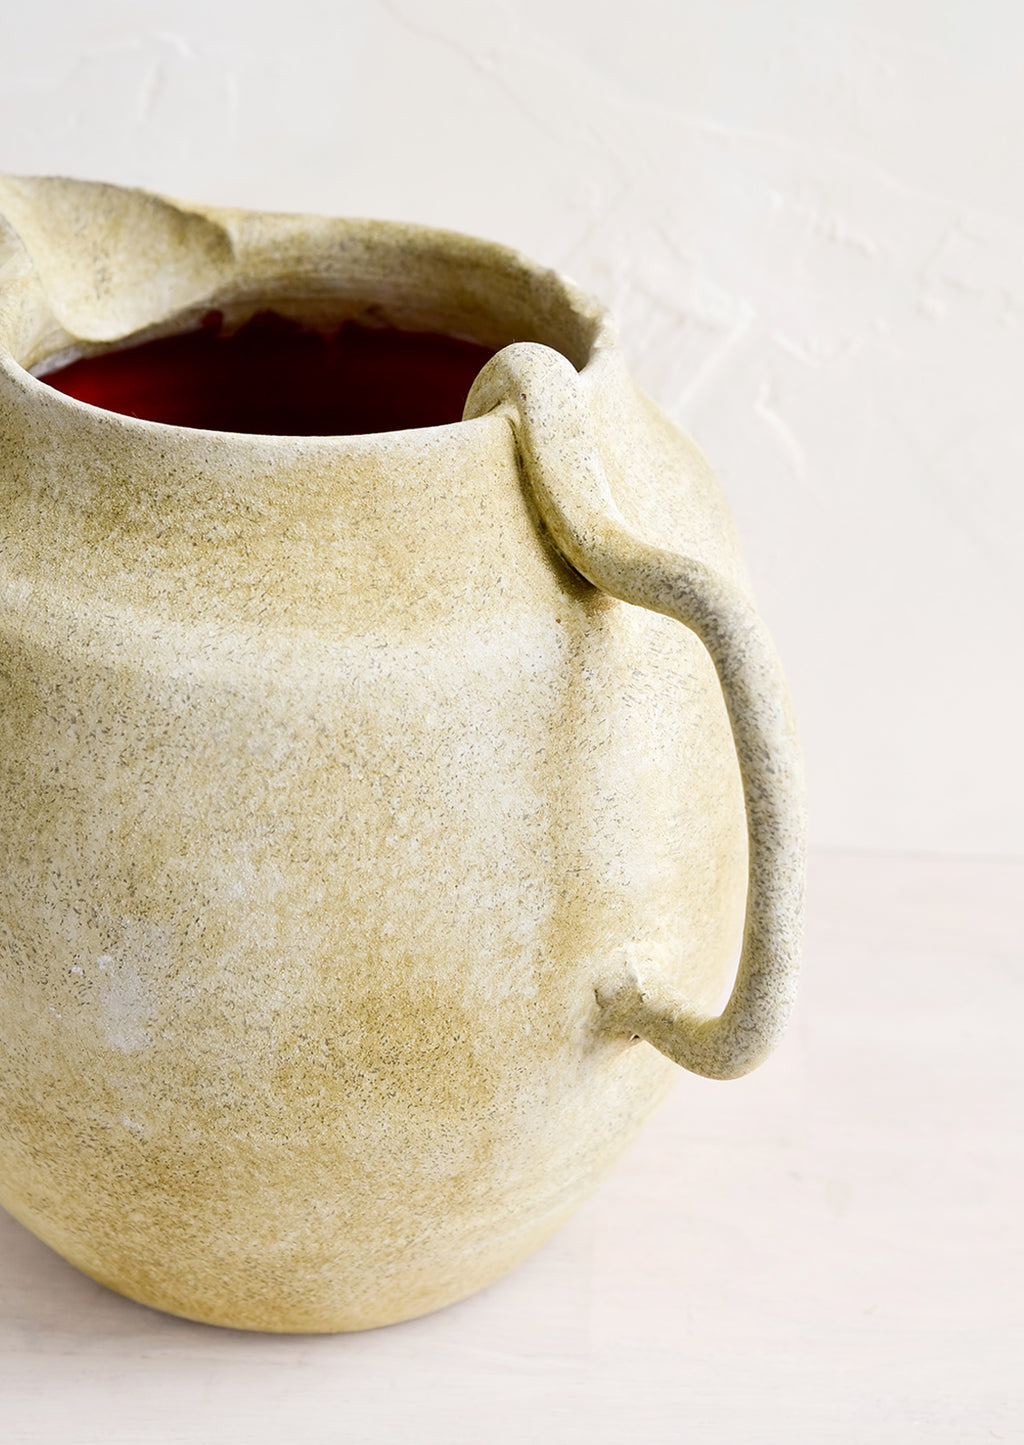 3: Curved handle on a ceramic pitcher.